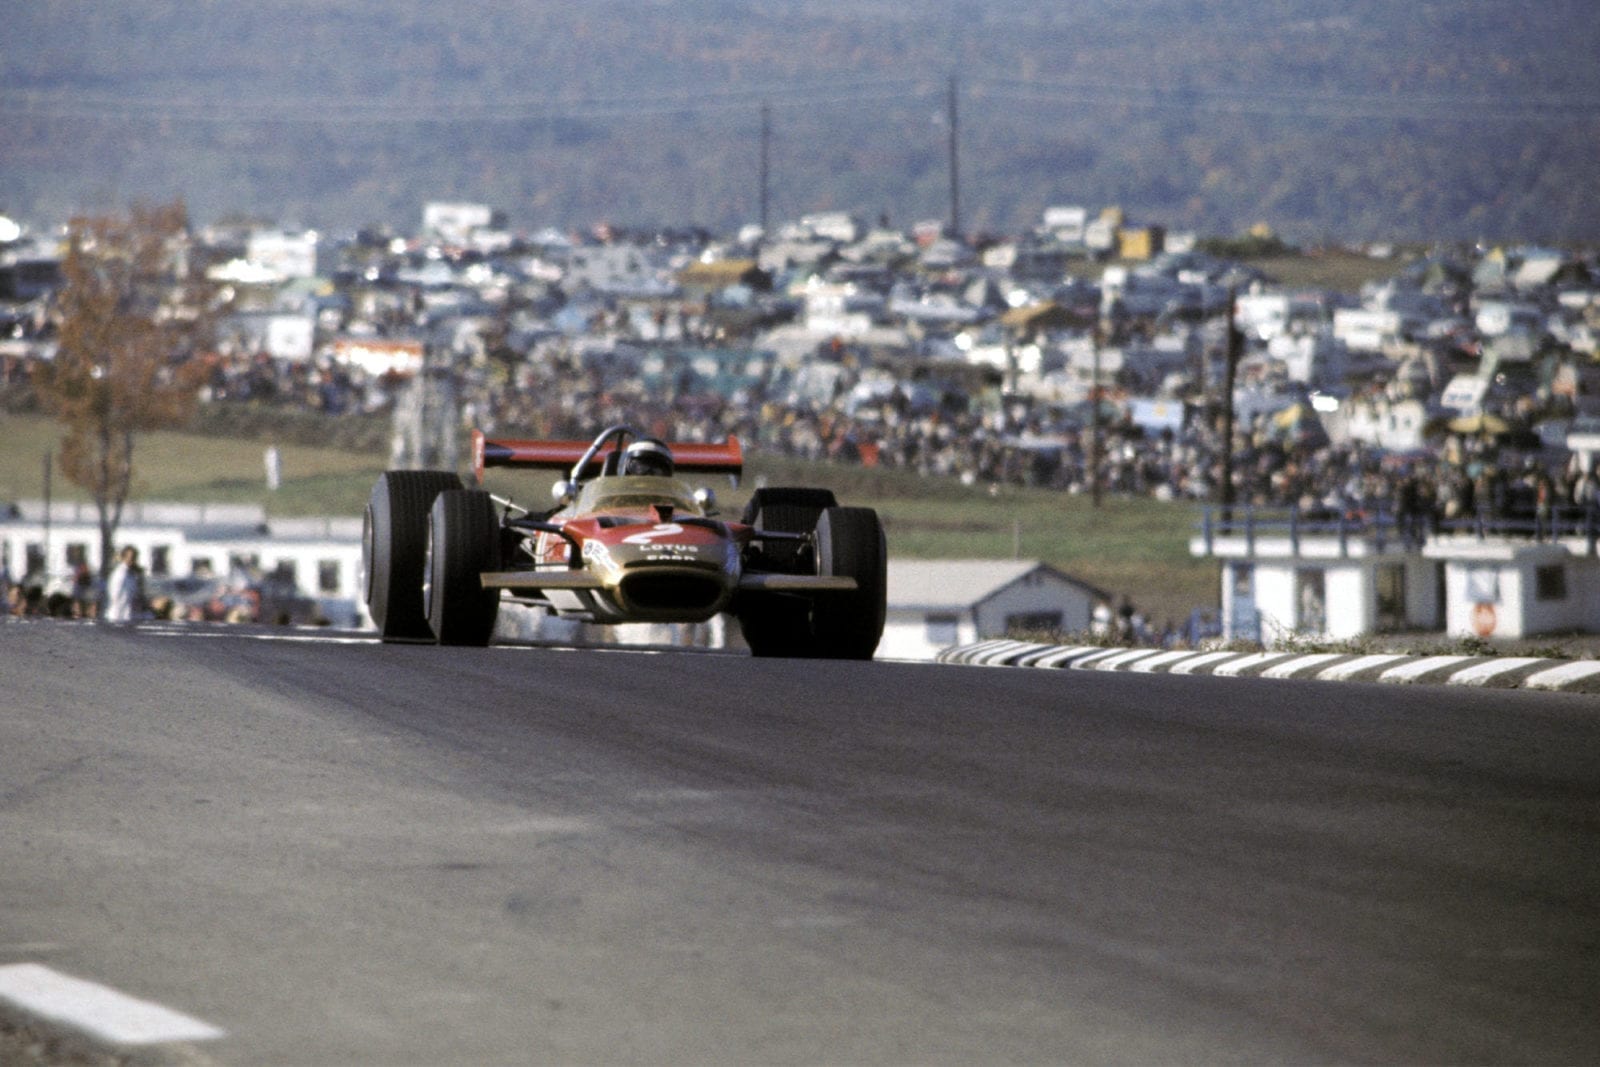 Jochen Rindt on his way to victory at the 1969 United States Grand Prix